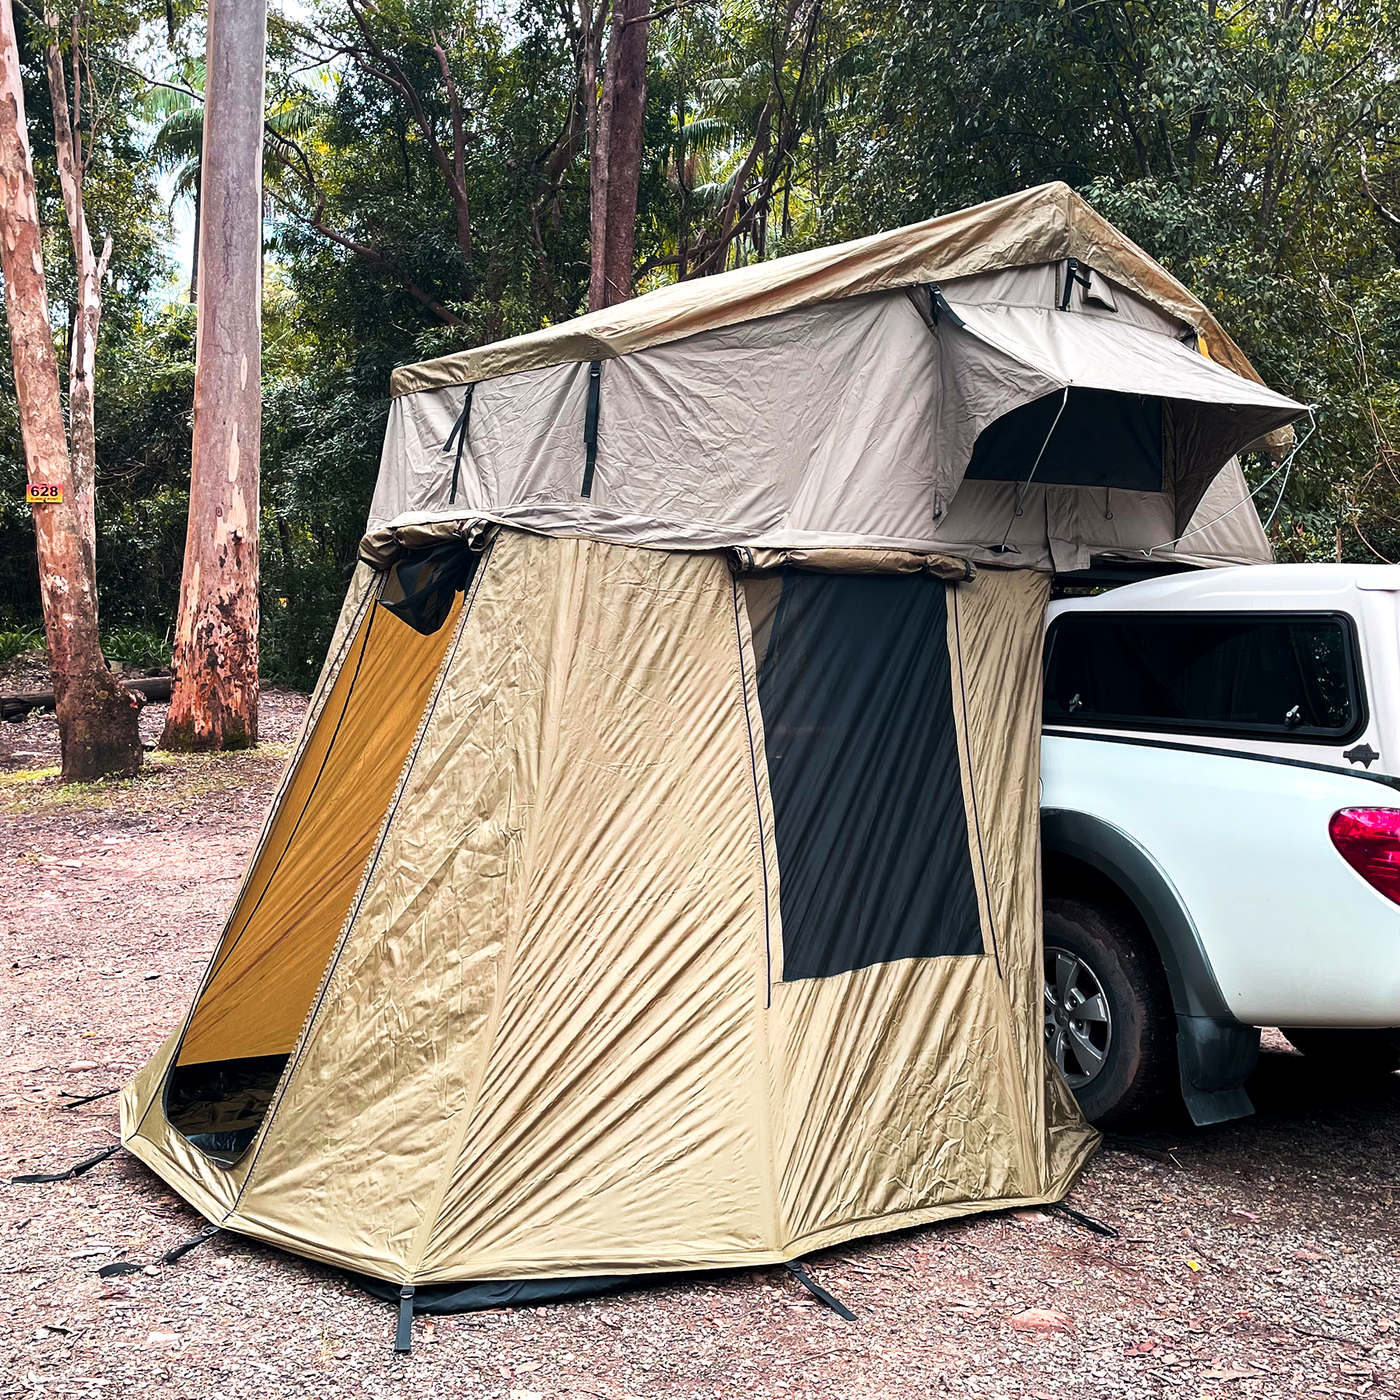 ANNEX EXTENSION FOR SOFT SHELL TENT